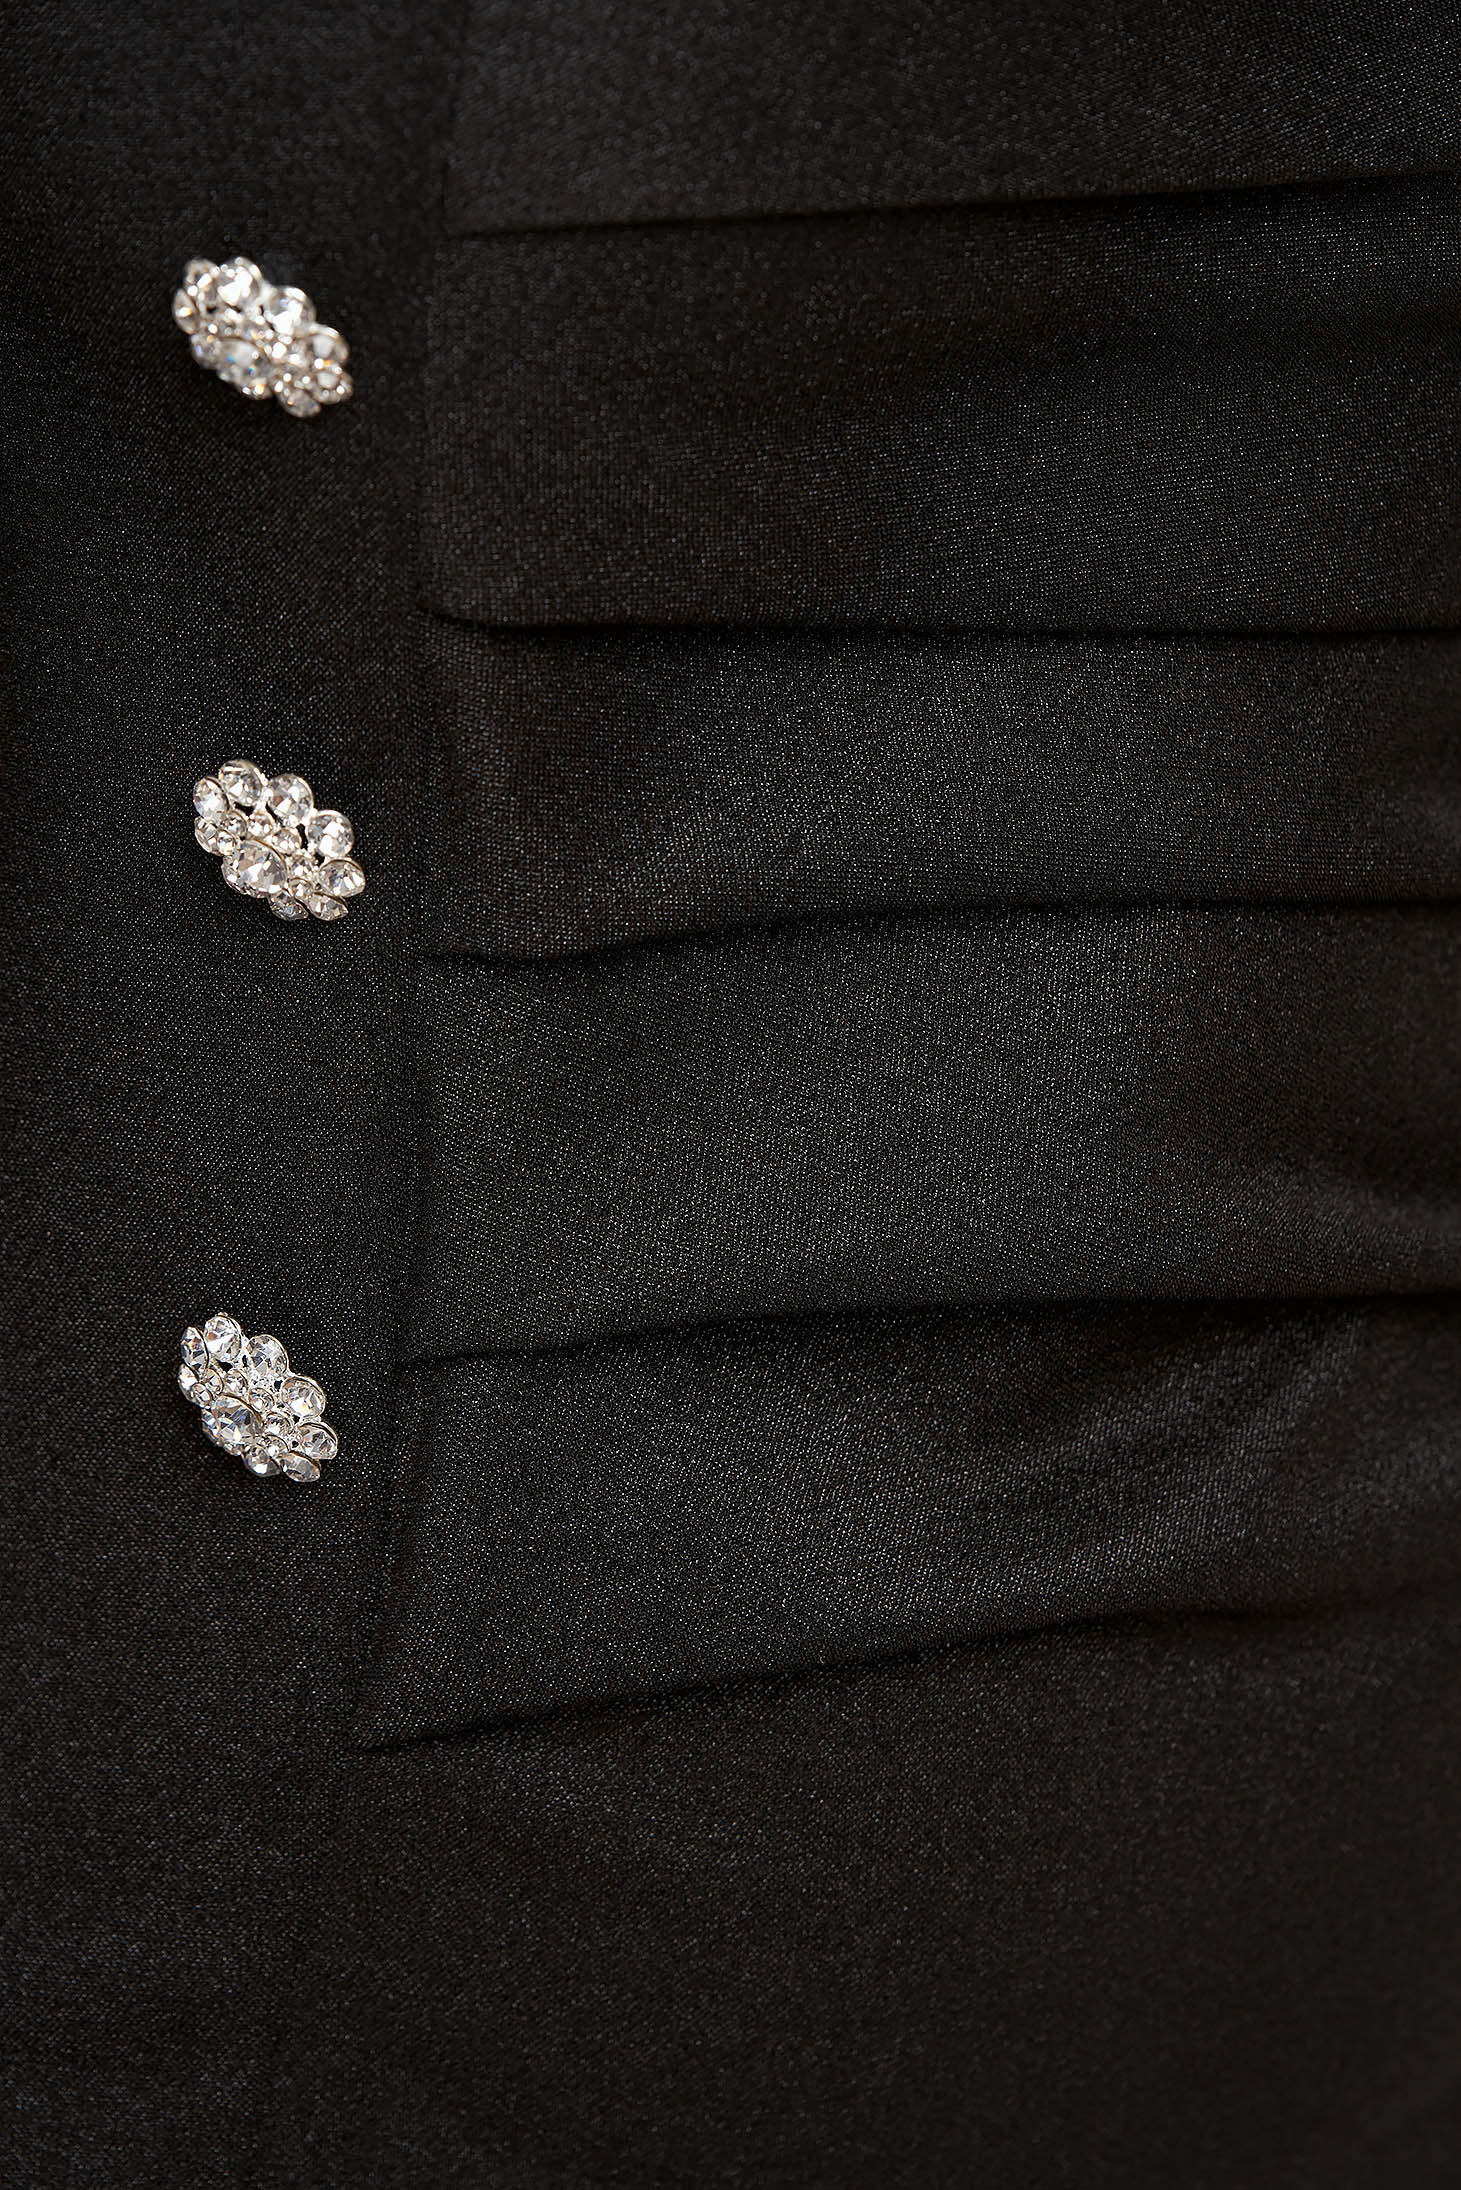 Black dress crepe pencil with decorative buttons slit - StarShinerS 6 - StarShinerS.com